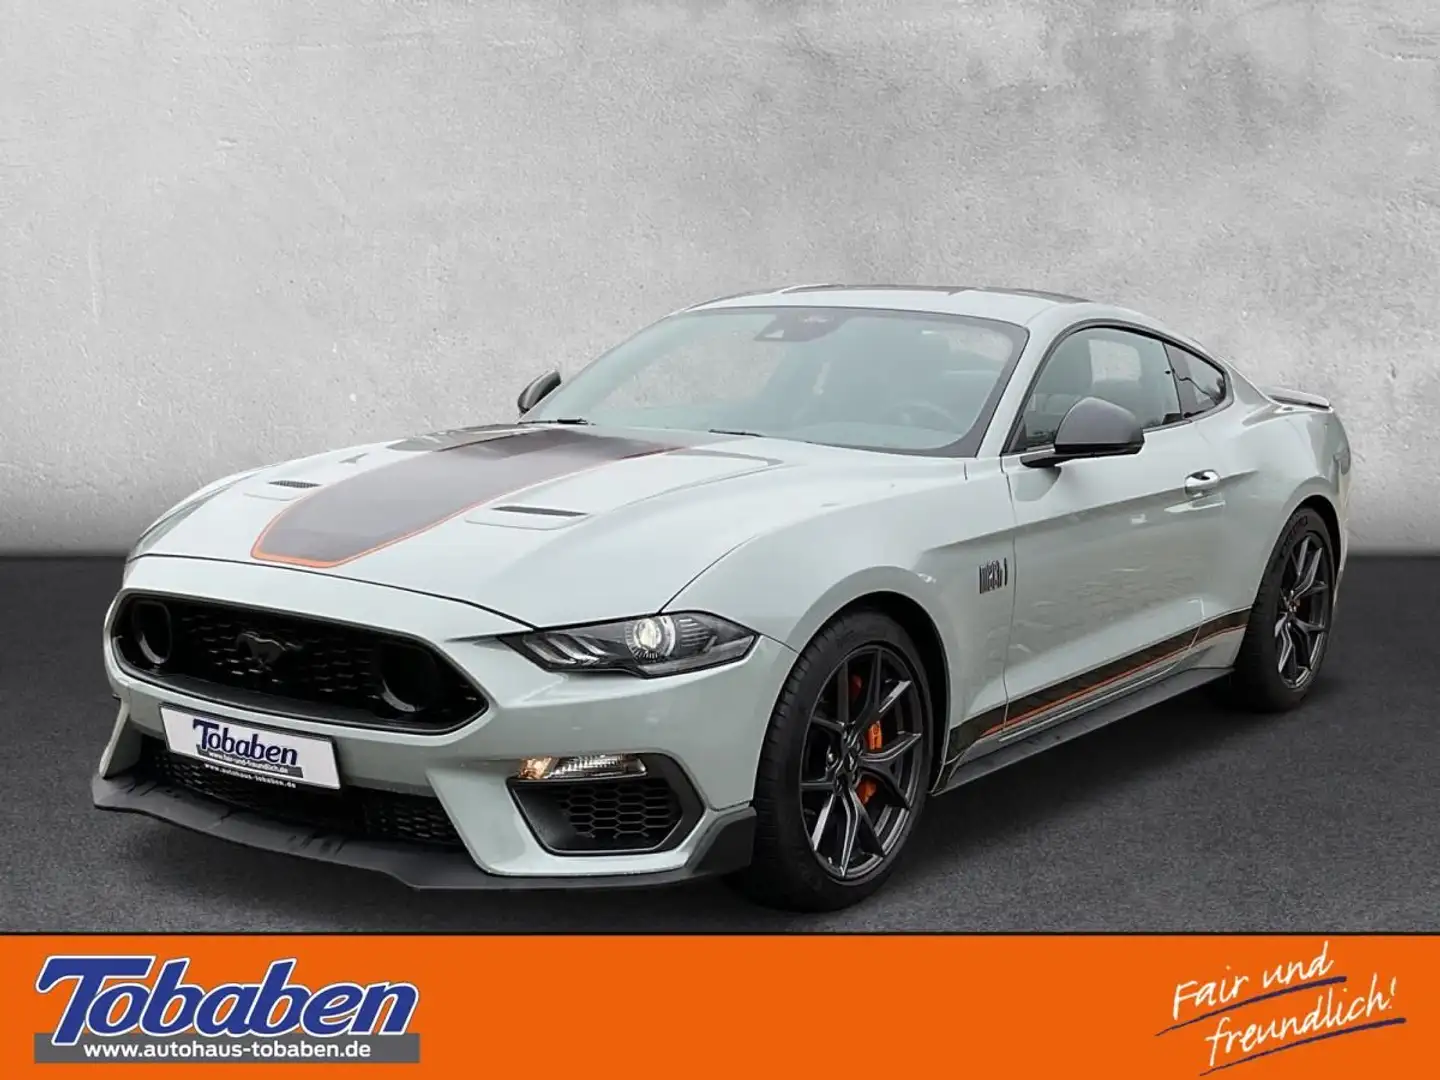 Ford Mustang MACH 1 5.0 Ti-VCT V8 338kW Auto Coupe, Grijs - 1